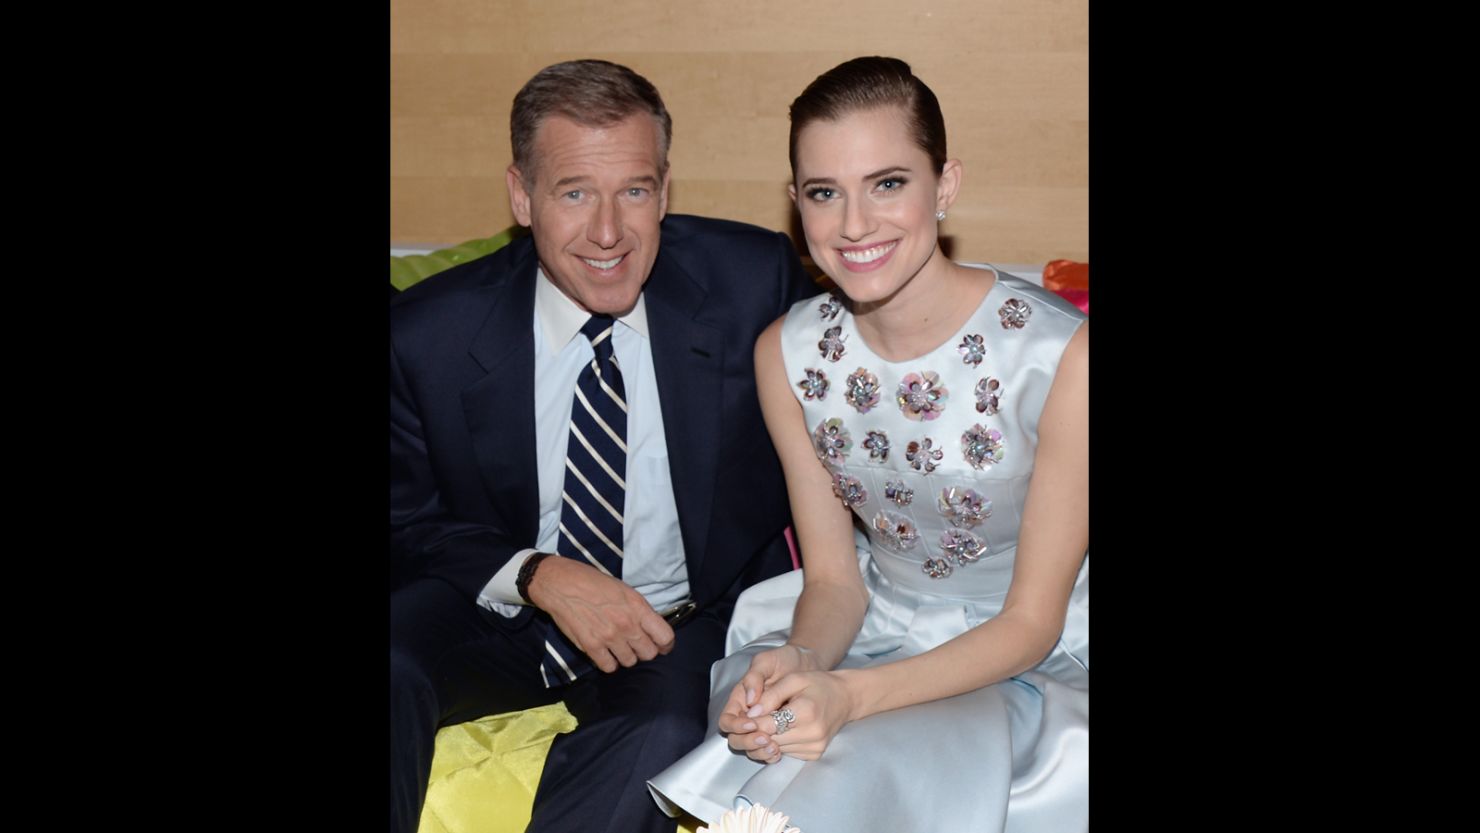 Brian Williams and Allison Williams attend the "Girls" season three premiere after party in January 2014 in New York. 